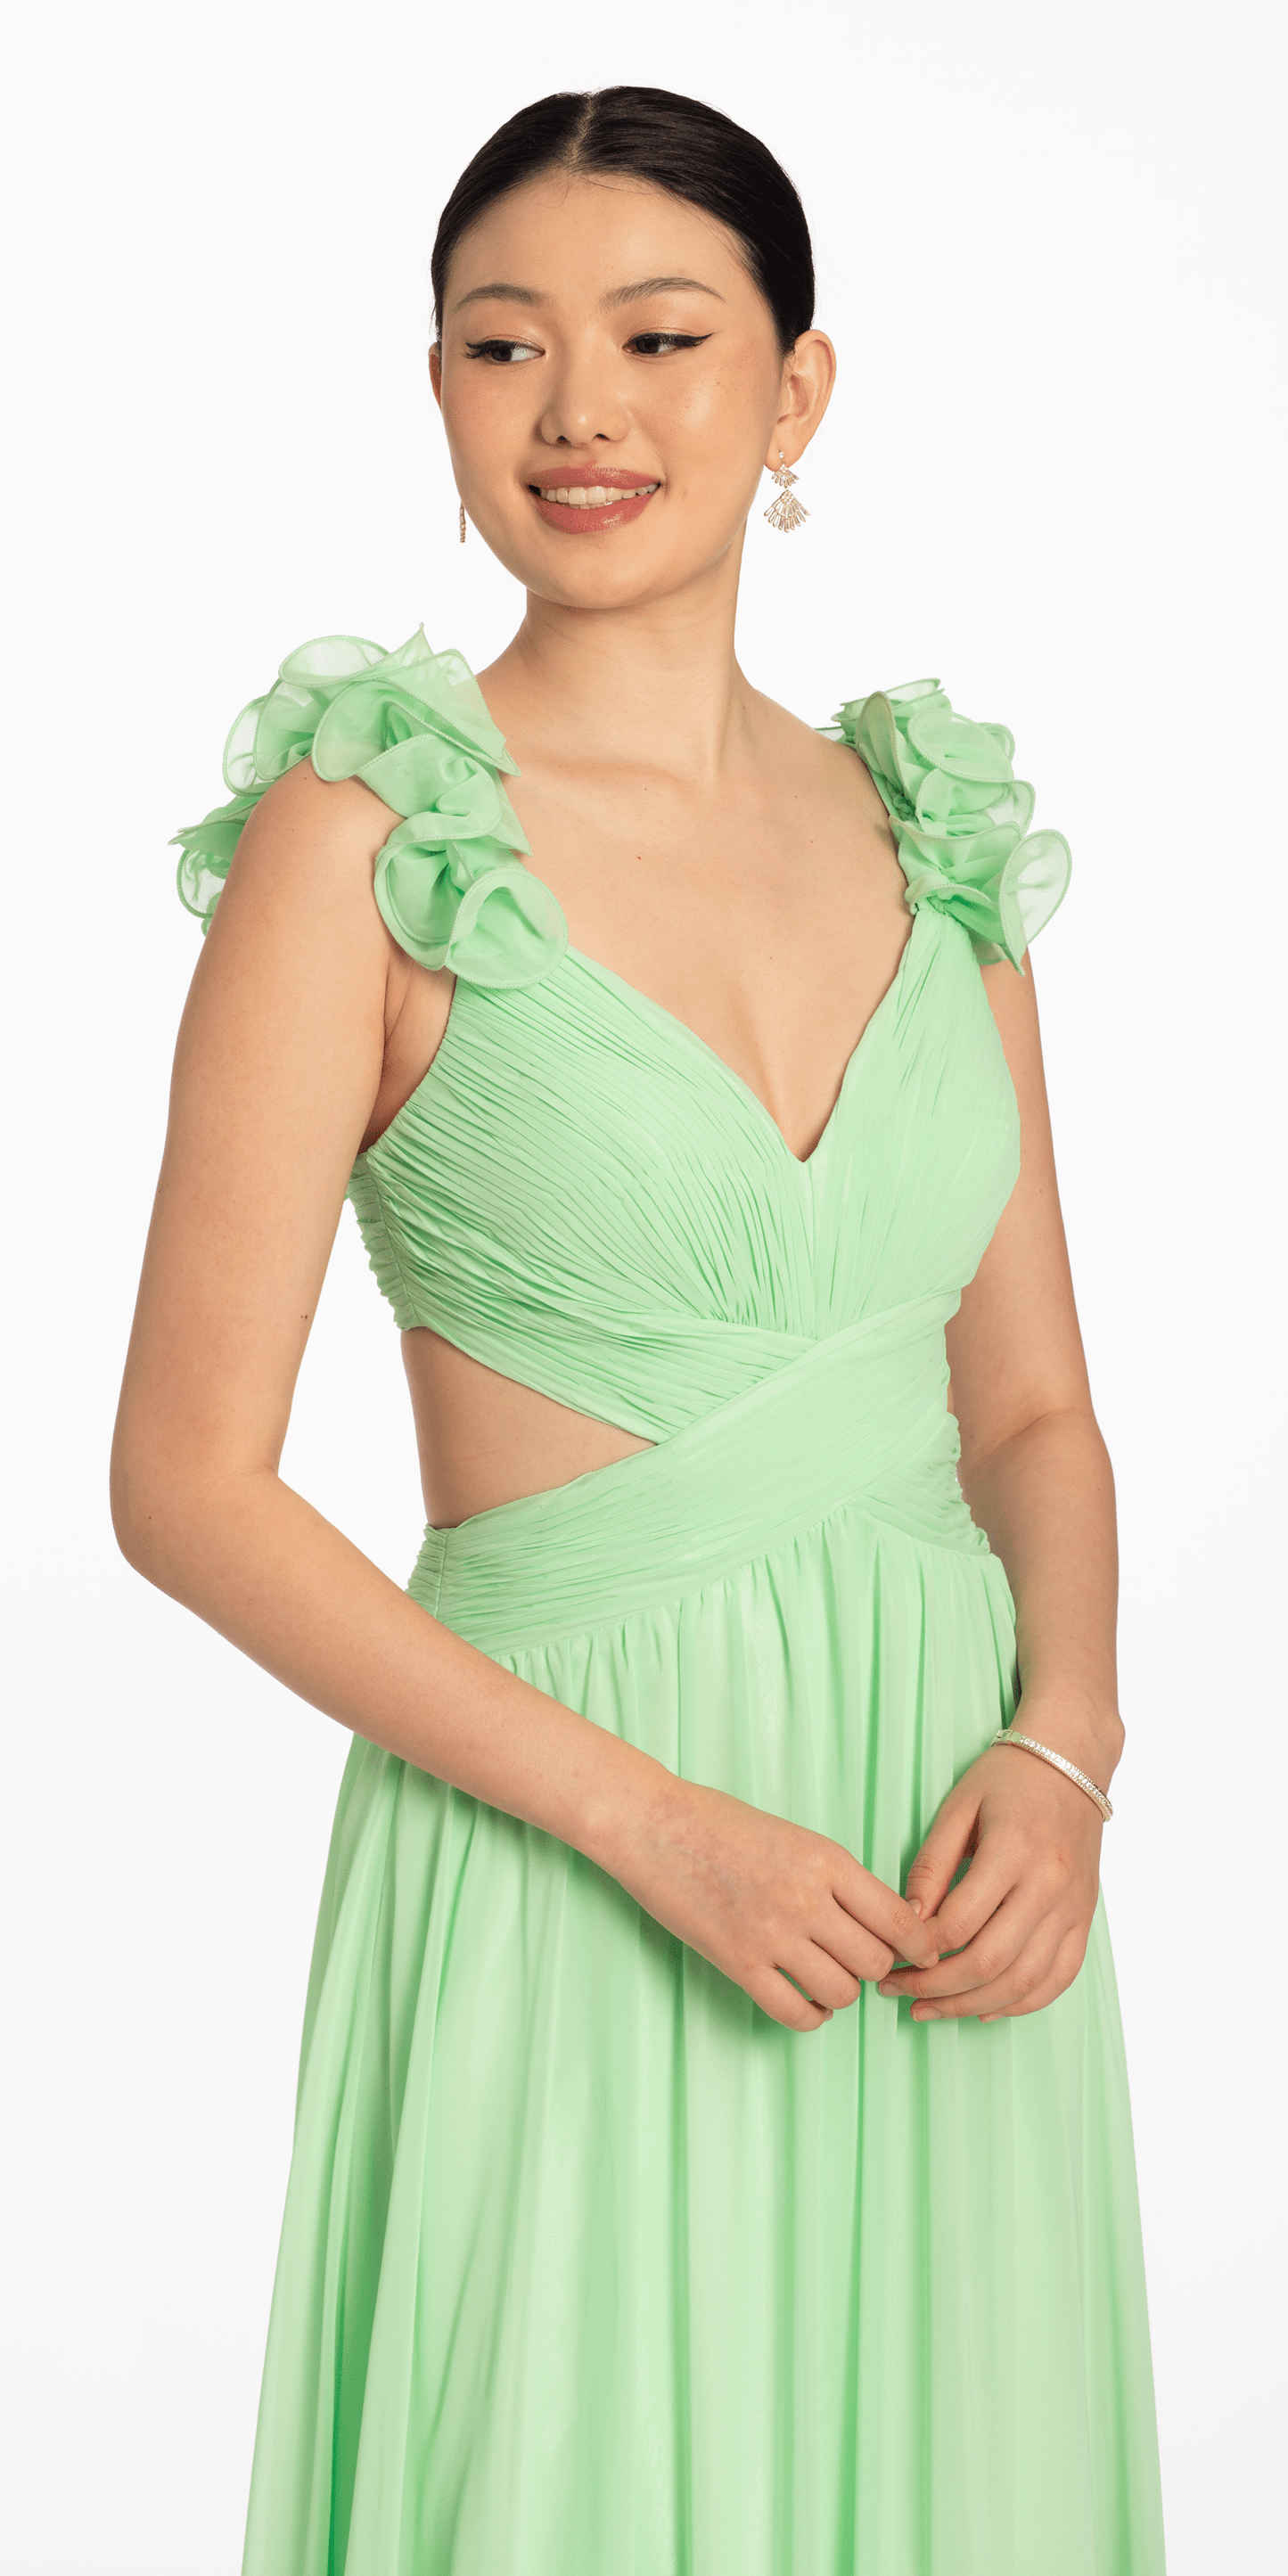 Camille La Vie Ruched Chiffon Front Dress with Shoulder Ruffles